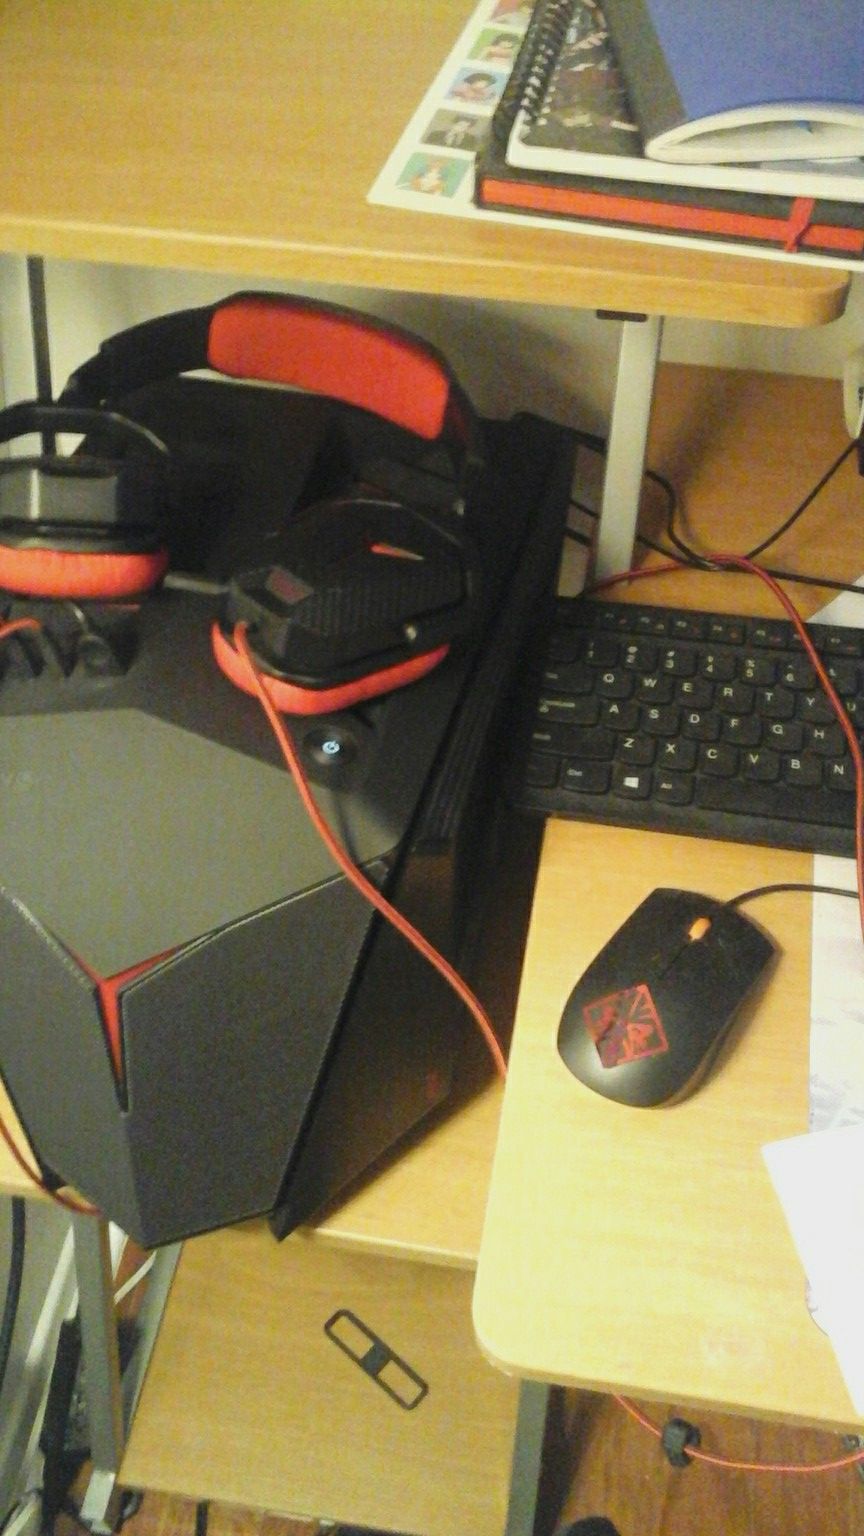 computer desktop with headset and keyboard, mouse